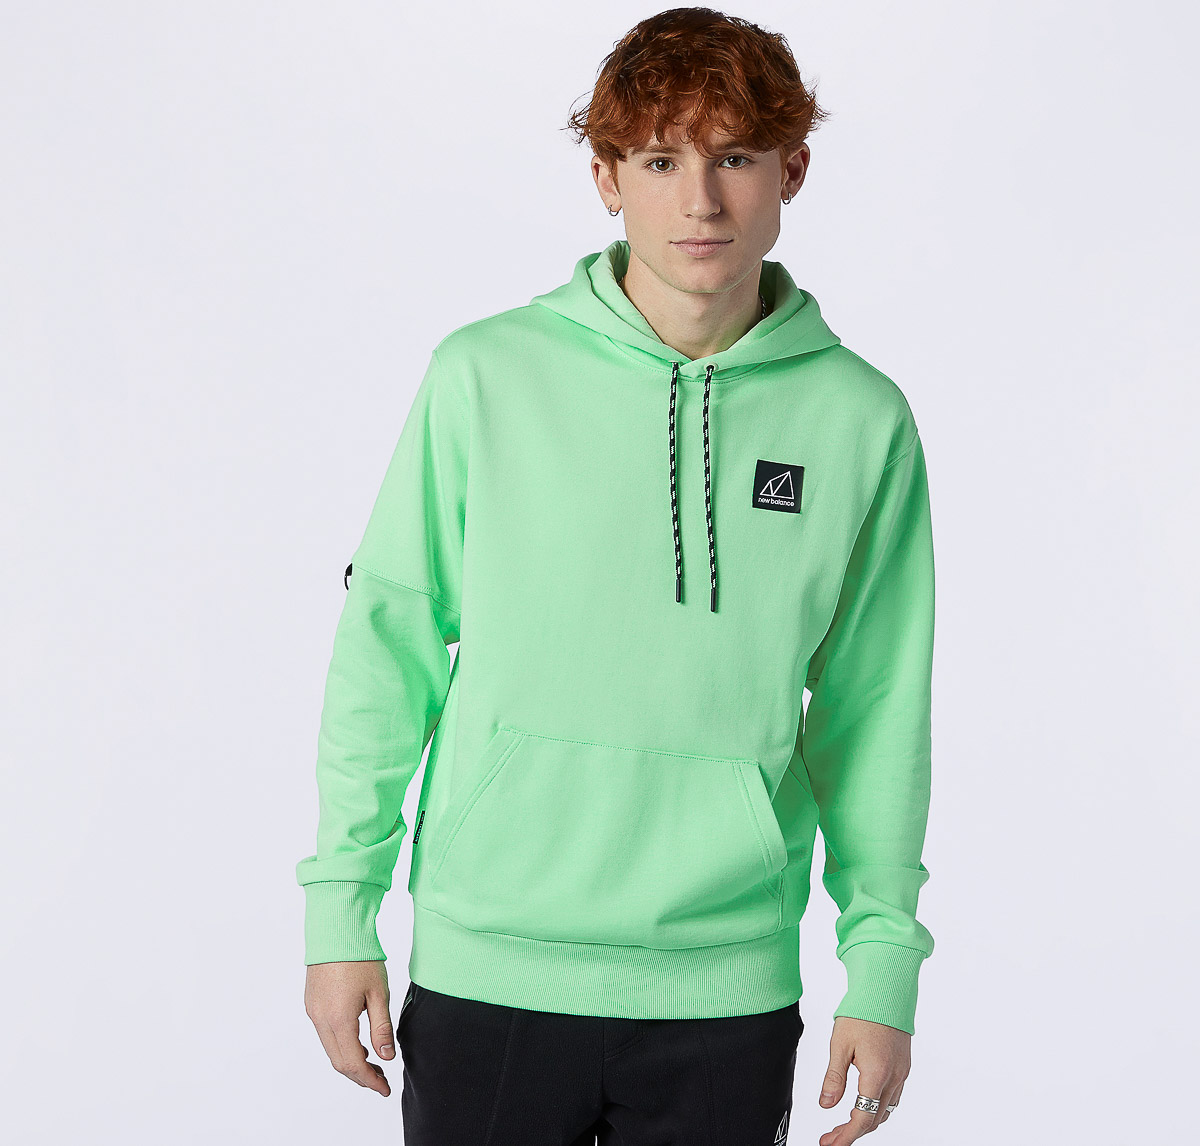 New Balance All Terrain Hoodie - Agave Green front